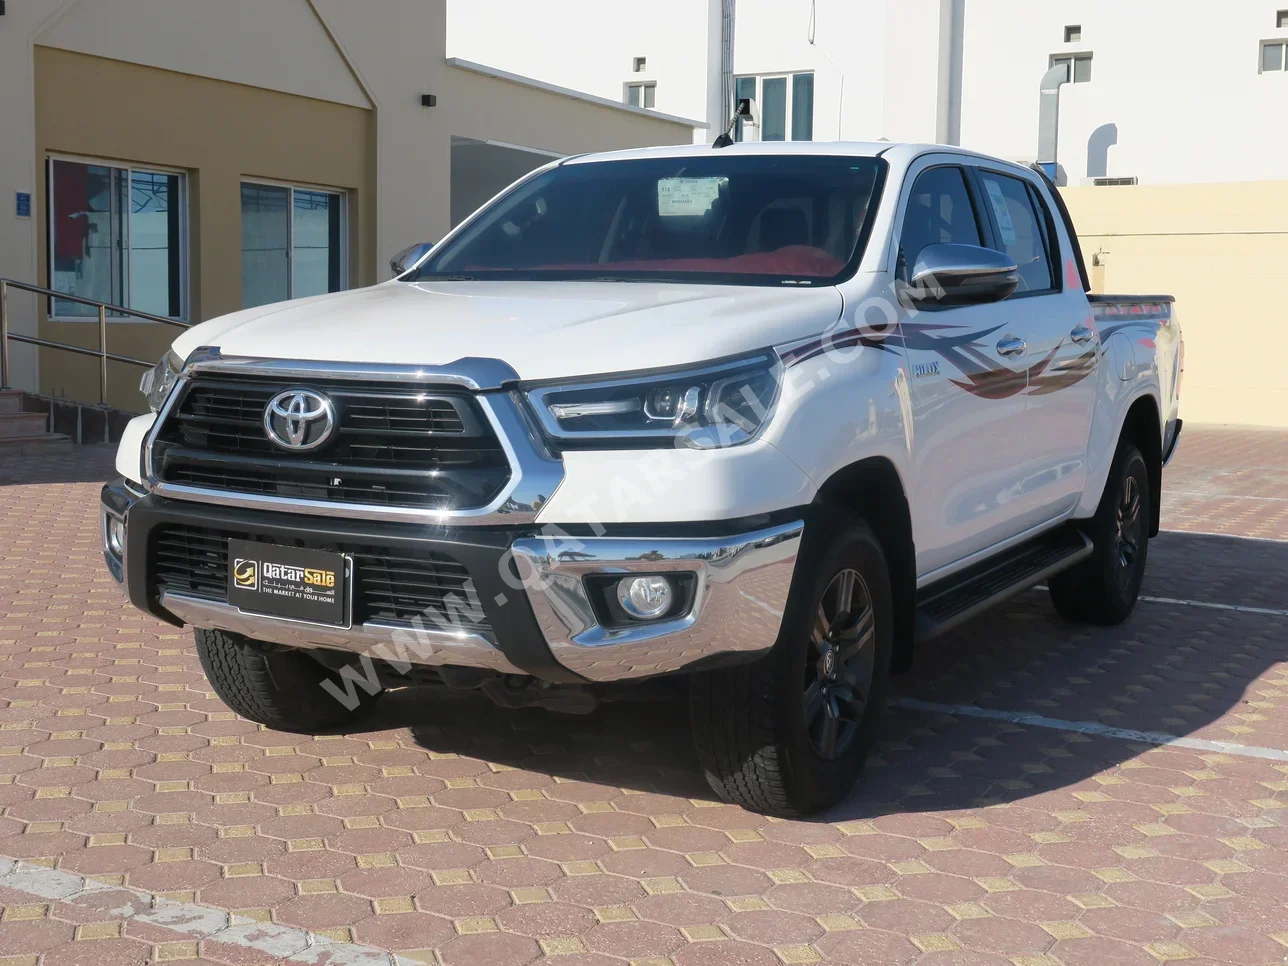 Toyota  Hilux  SR5  2022  Automatic  19,000 Km  4 Cylinder  Four Wheel Drive (4WD)  Pick Up  White  With Warranty